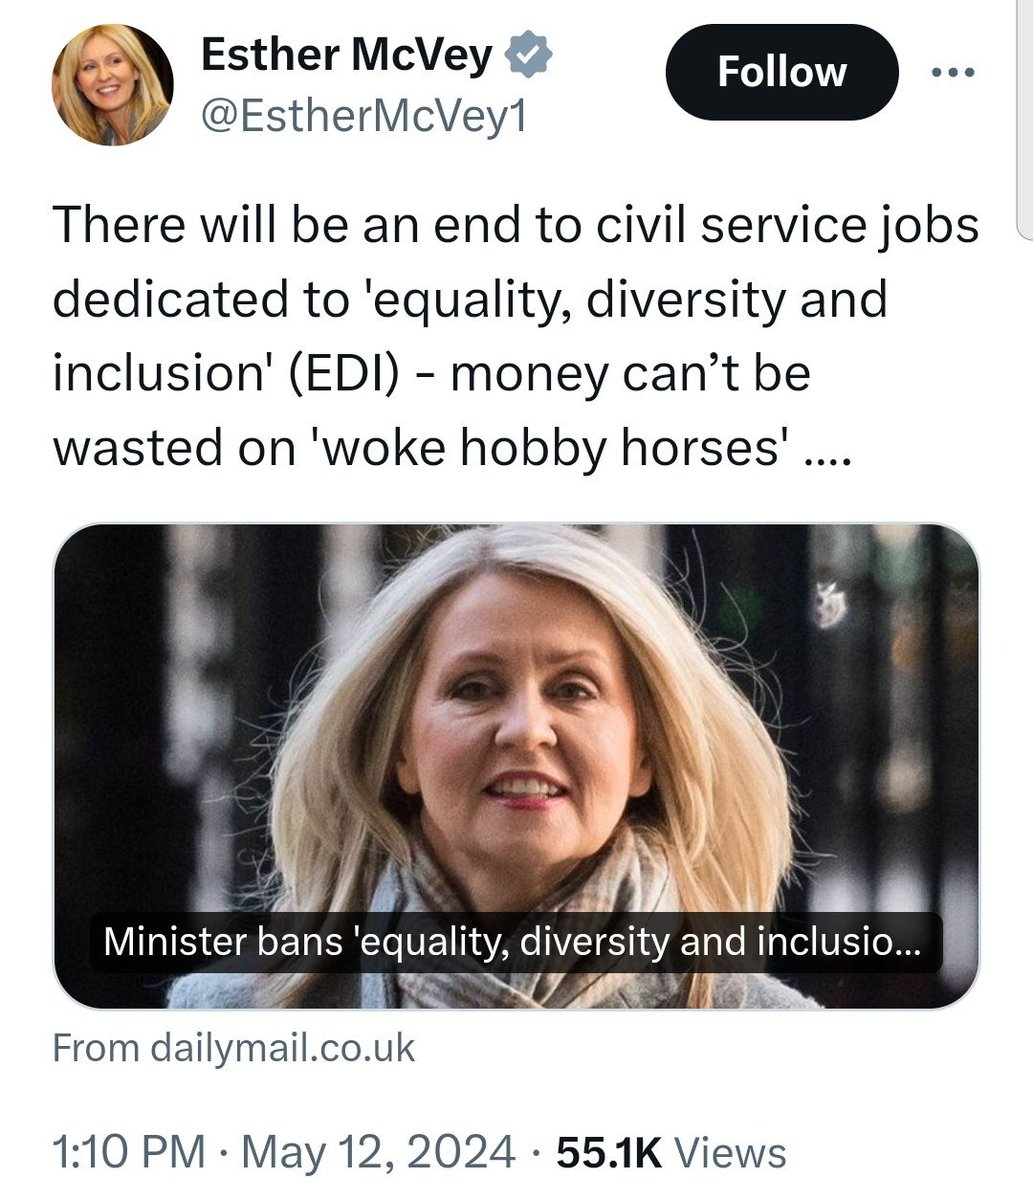 Someone has to pay for Tory corruption and it will be us. Working class kids won't be included in the civil service, Black people won't get on because of a structural lack of diversity, and women will suffer unequal treatment. And the rest of us - who will continue to be ruled by